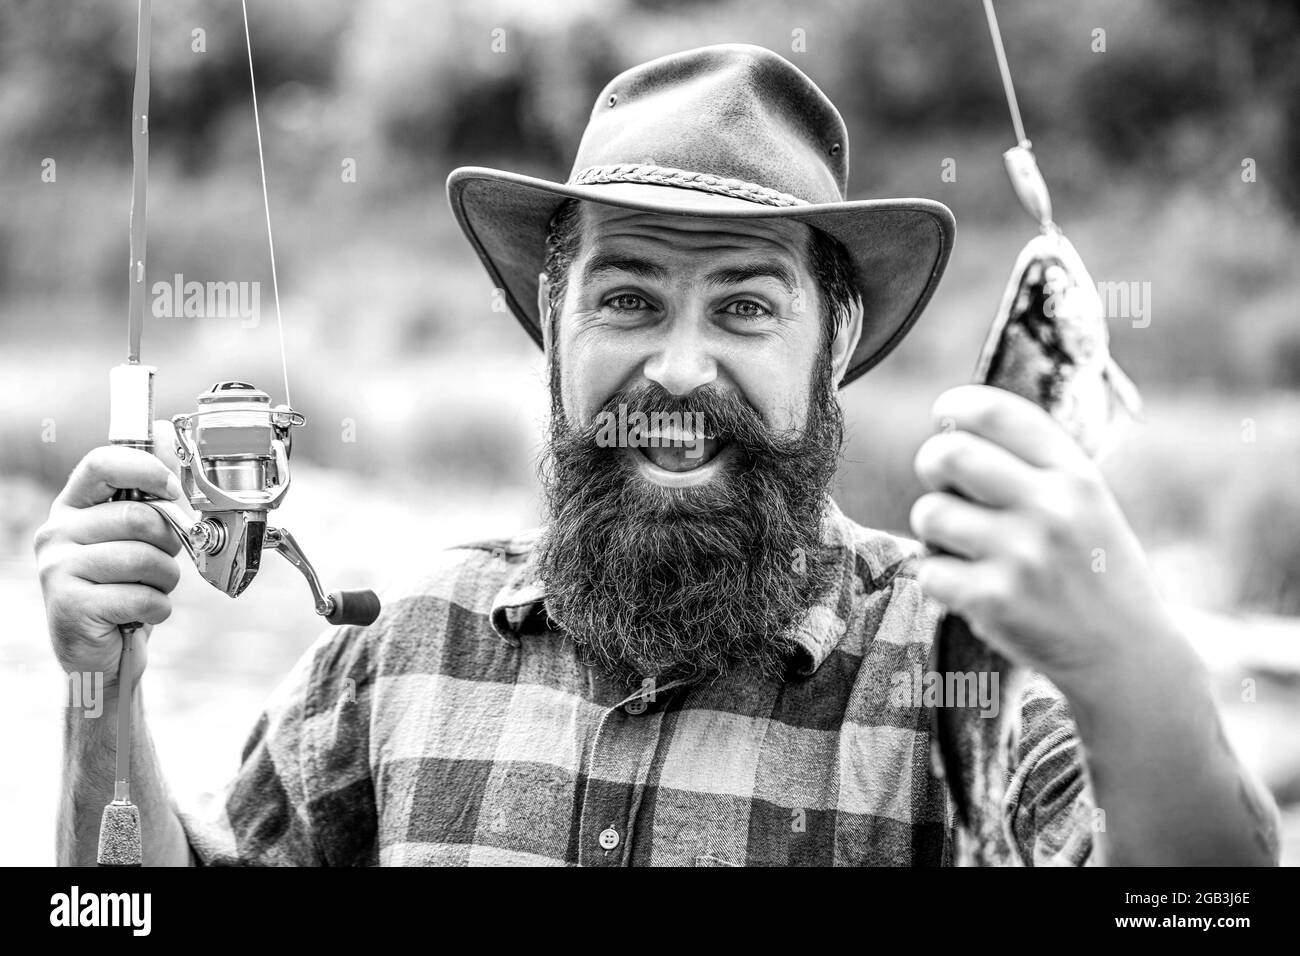 Man holding a trout fish. Fishing. Angler with fishing trophy. Fisherman and trout. Fishing backgrounds. Black and white Stock Photo